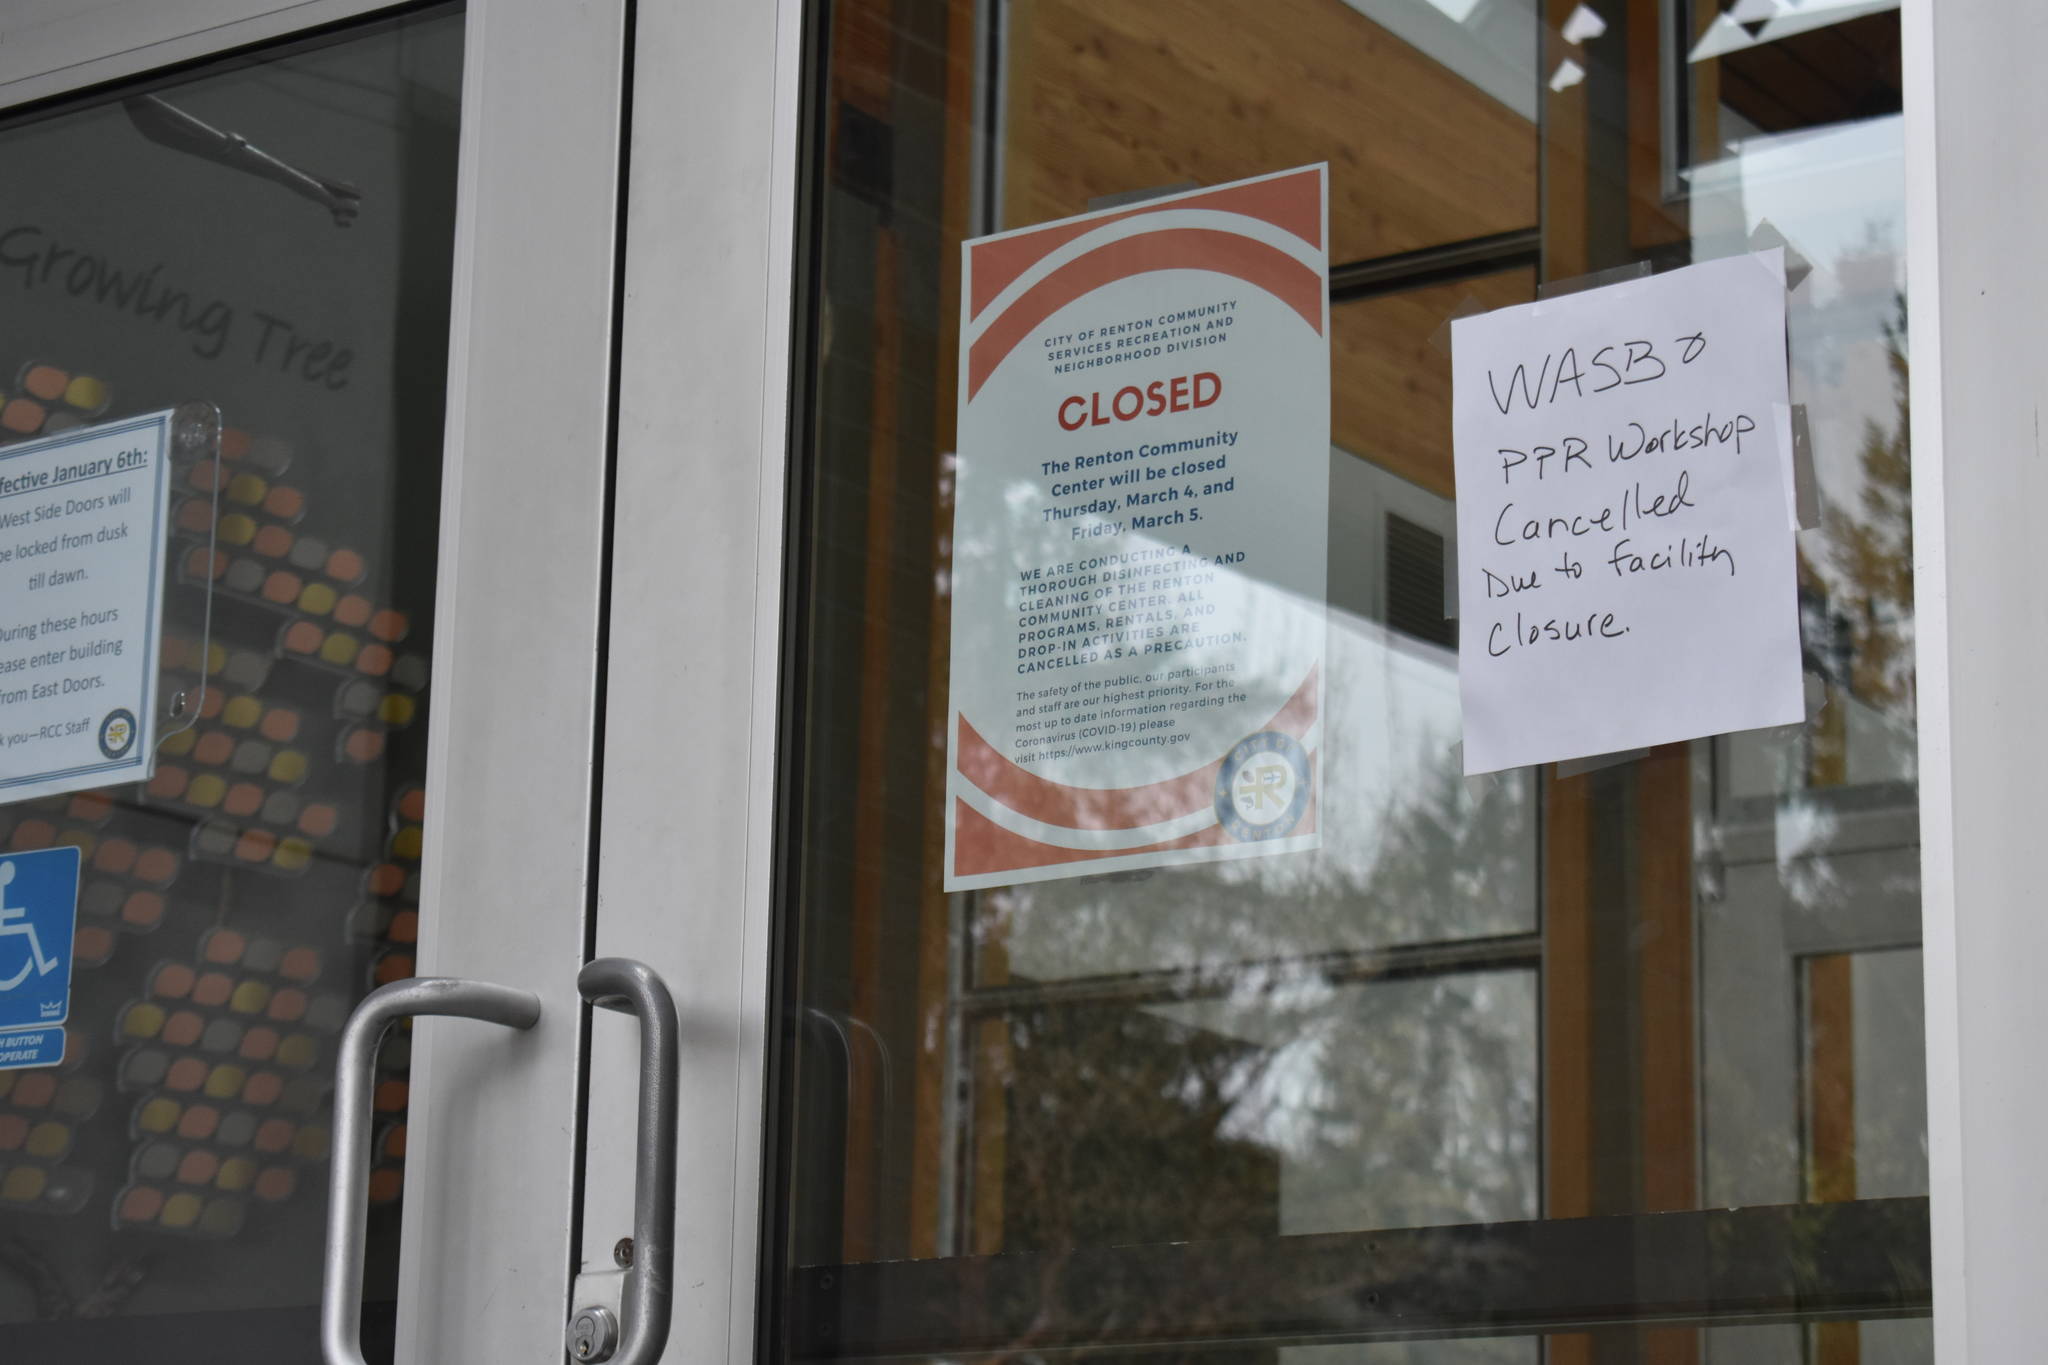 Photo by Haley Ausbun. The Renton Community Center, located at 1715 Maple Valley Highway, was closed until March 31 after the family of a preschooler in a program there told the city they had been exposed to a case of the novel coronavirus, COVID-19. Pictured: signage about the closure on the door of the center.